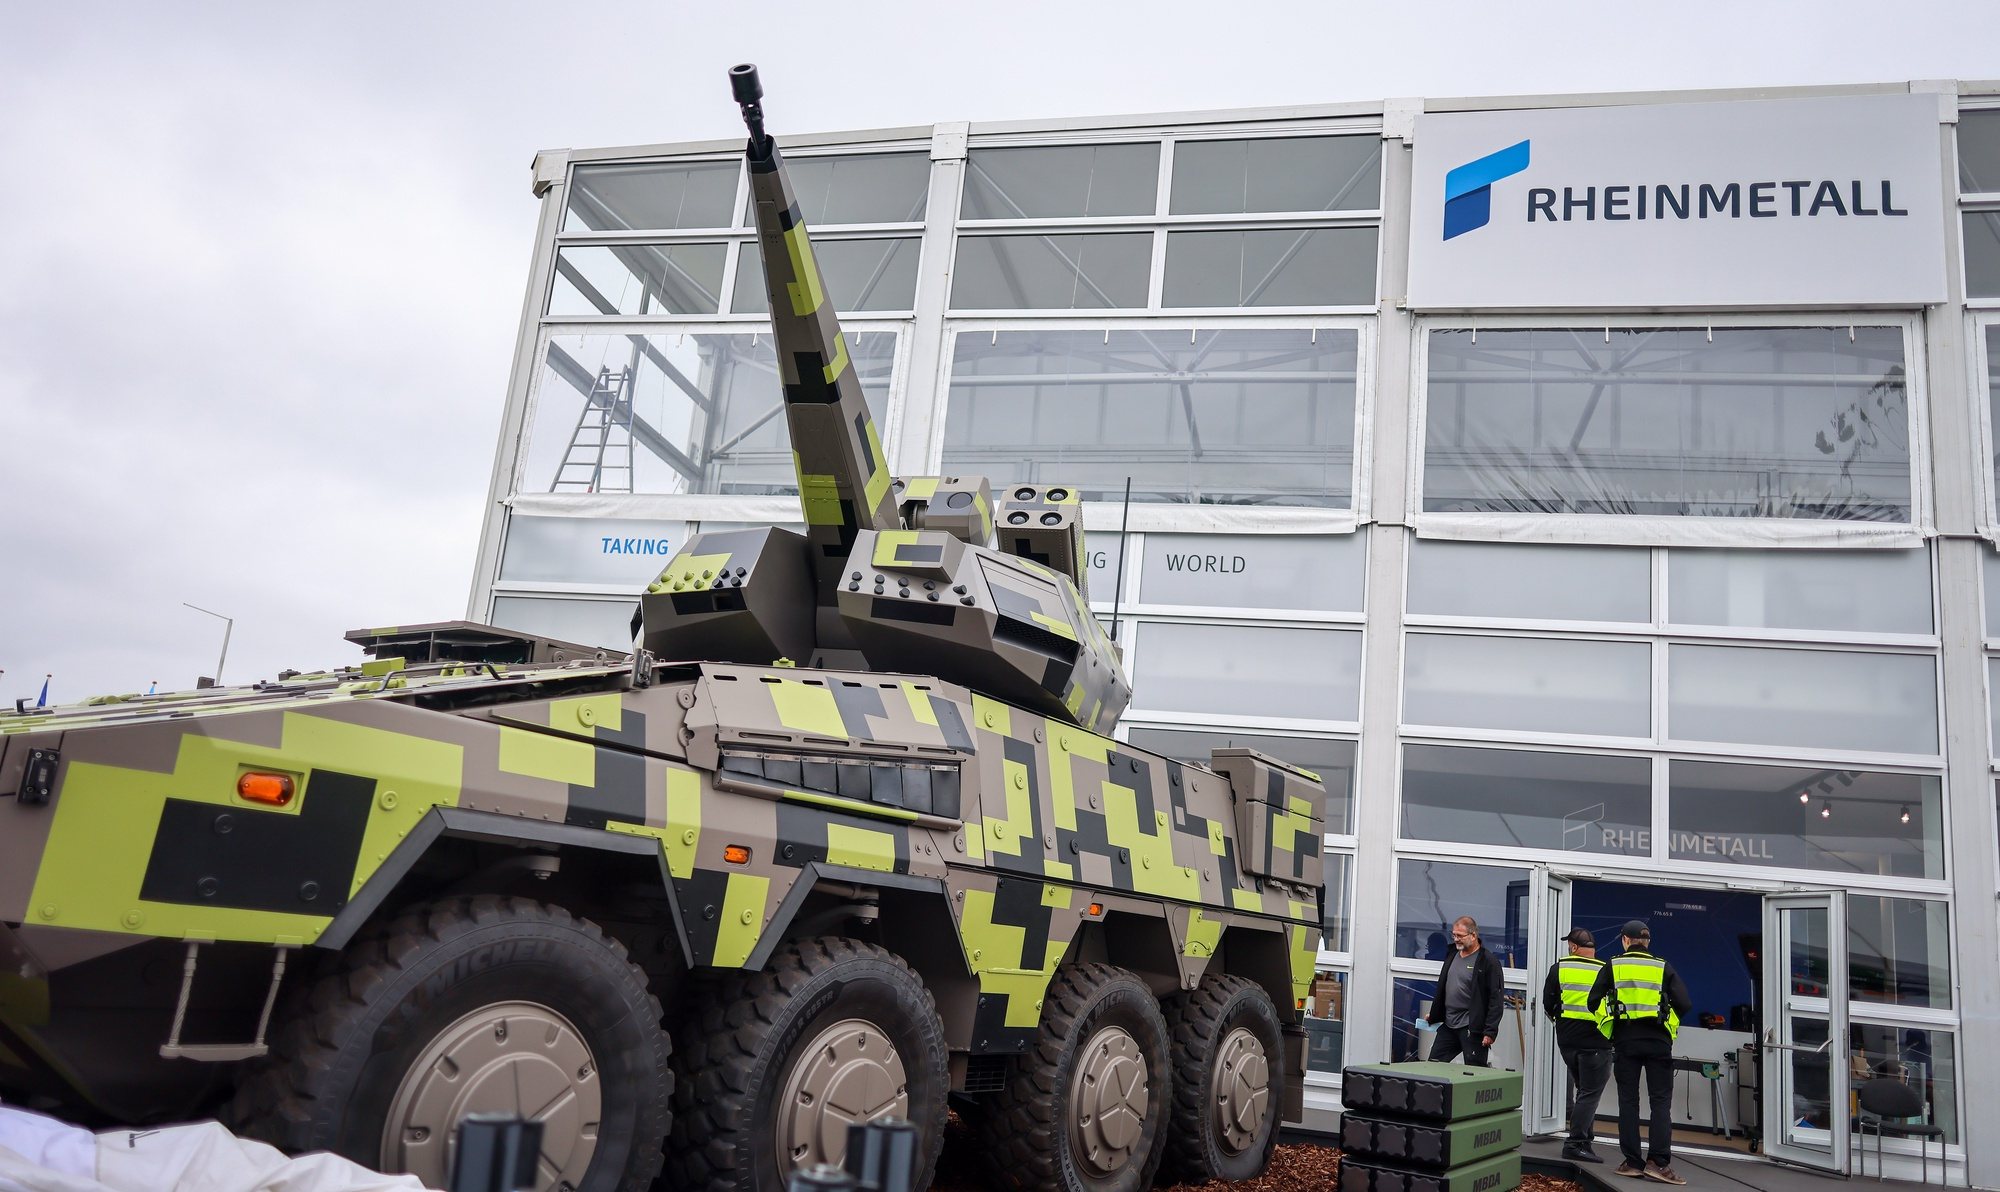 epa11387657 A tank is on display at the area of German weapons maker Rheinmetall at the ILA Berlin Air Show 2024 in Schoenefeld near Berlin, Germany, 03 June 2024. The aerospace and defense industry exhibition takes place at the Berlin-Brandenburg airport from 05 to 09 June 2024. The ILA 2024 is expecting around 600 exhibitors from 30 countries in the aviation, aerospace, defence and support, supplier and advanced air mobility segments.  EPA/HANNIBAL HANSCHKE